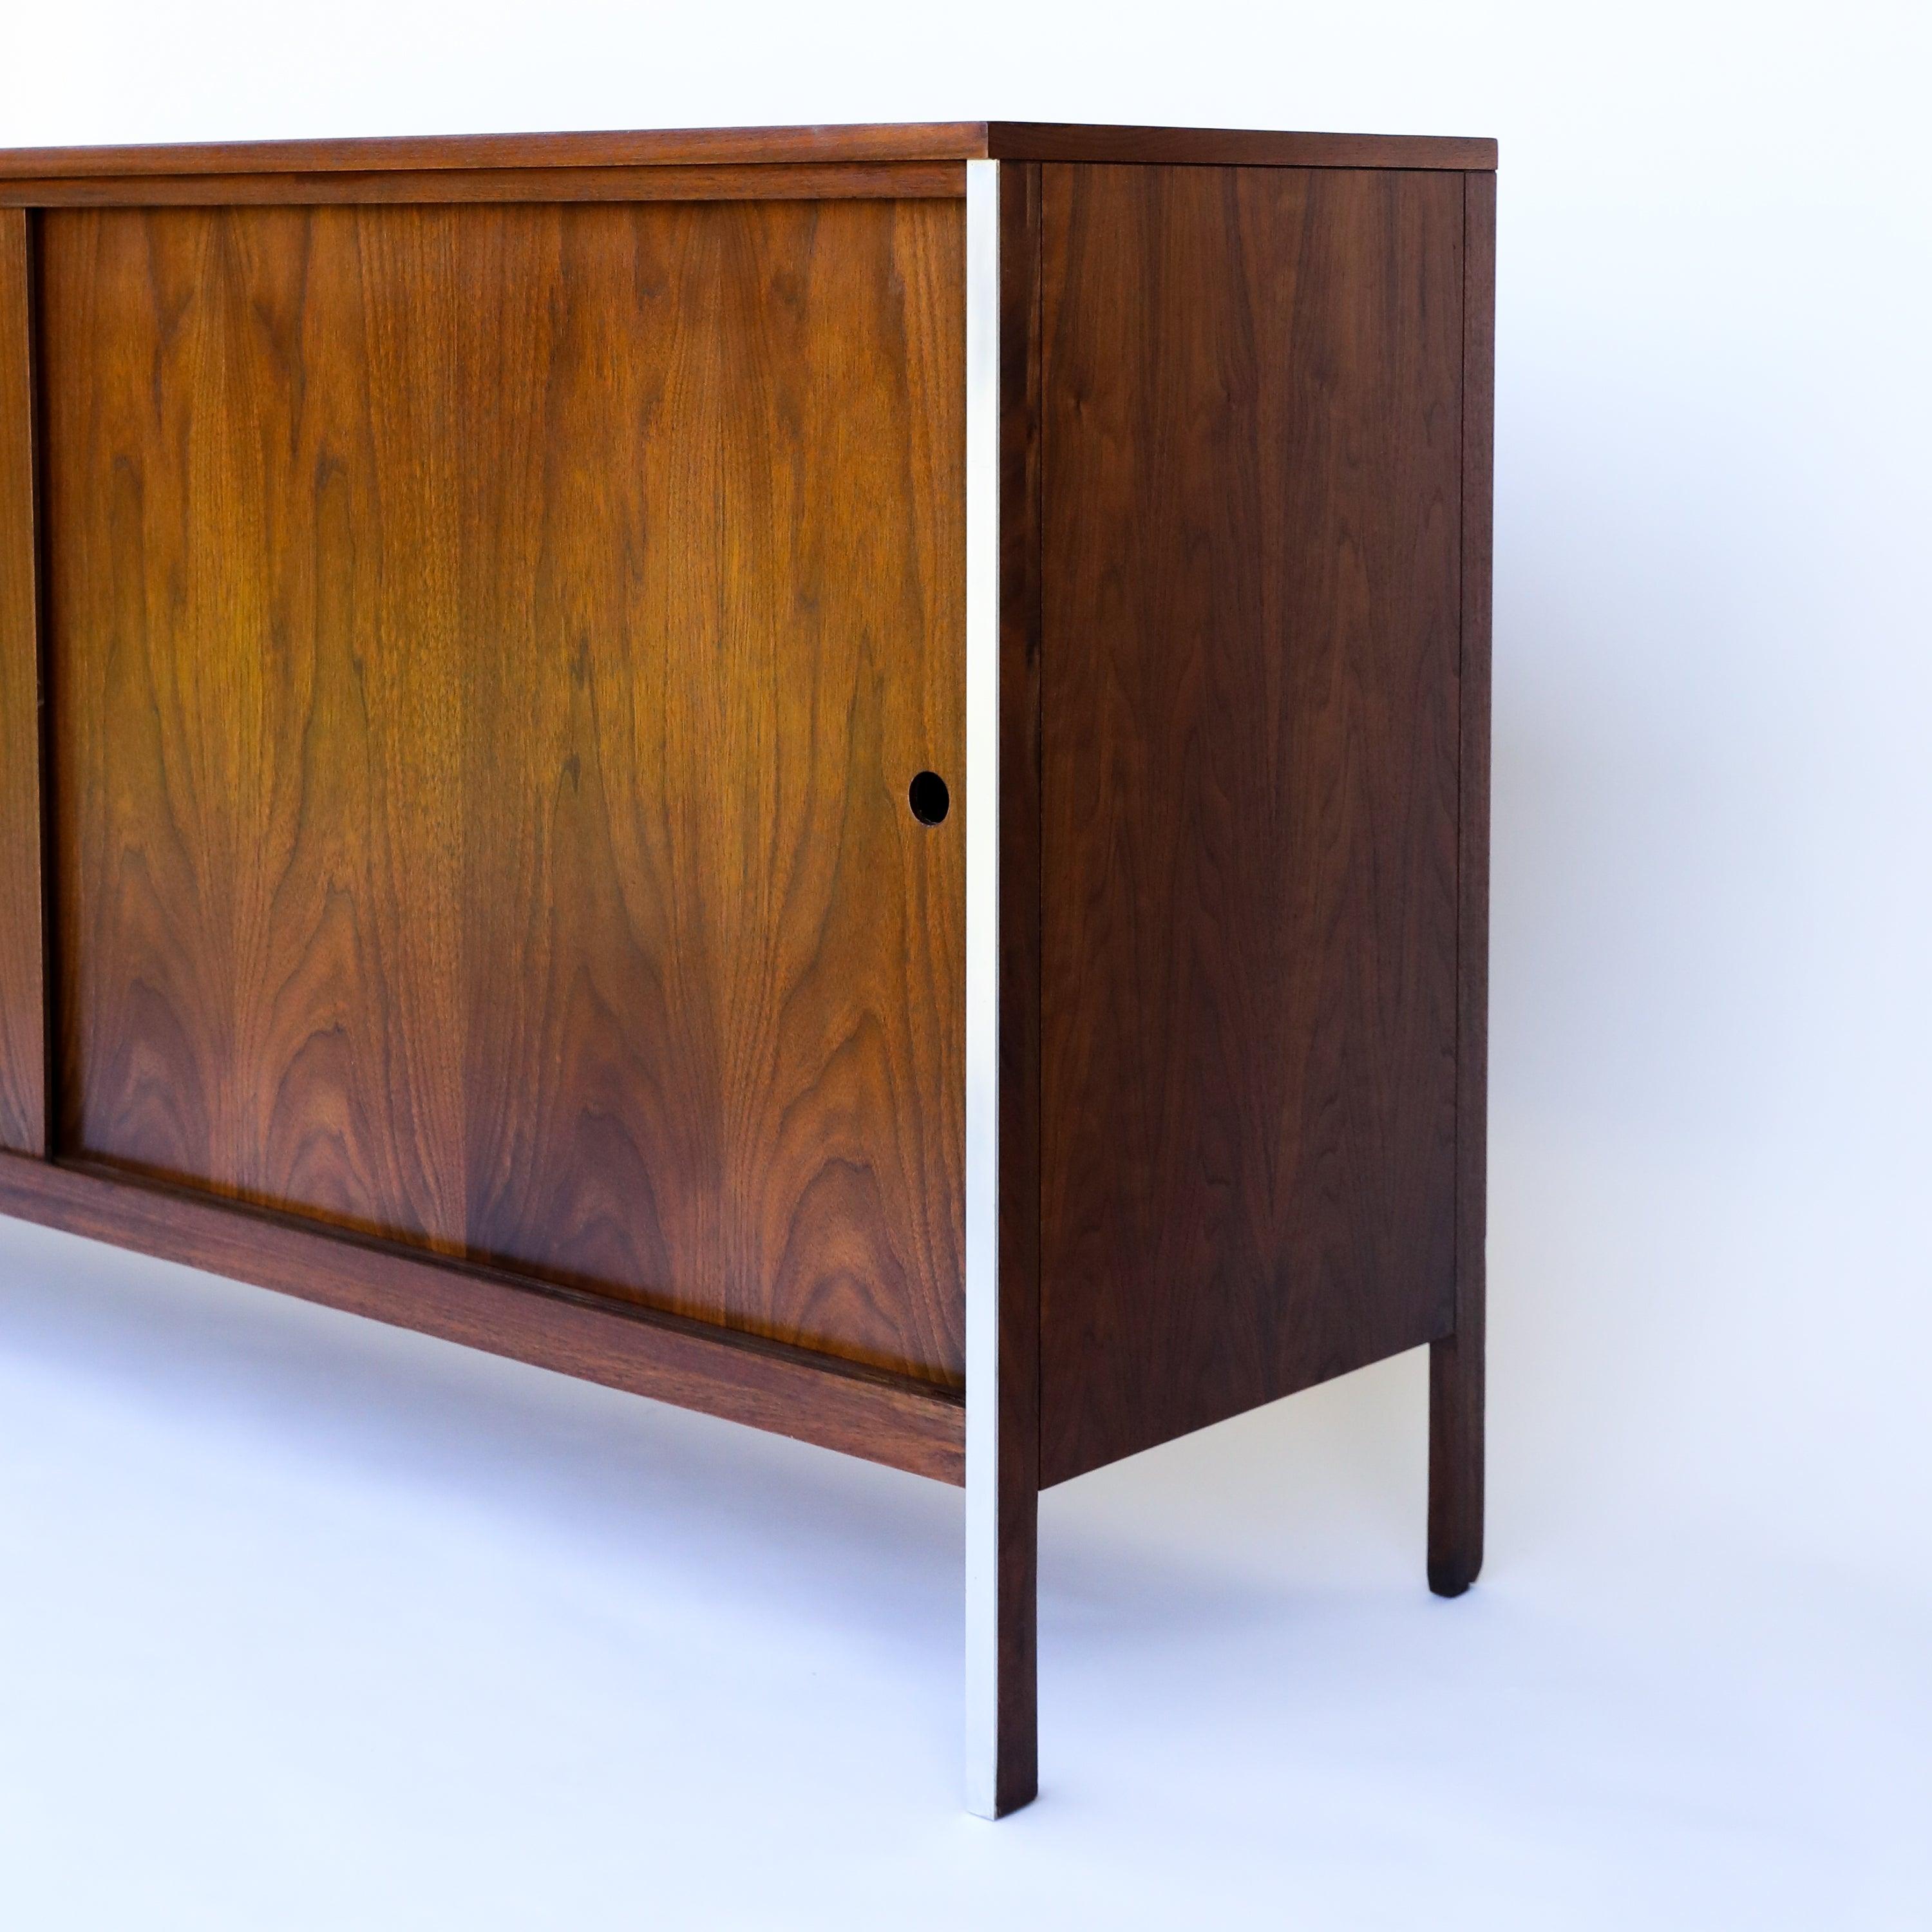 

This is a classic two-door cabinet designed by Paul McCobb for Calvin Furniture, circa the early 1960s. This piece is executed in exquisite walnut with two drawers on the left side and one adjustable shelf on the right side covered by two sliding